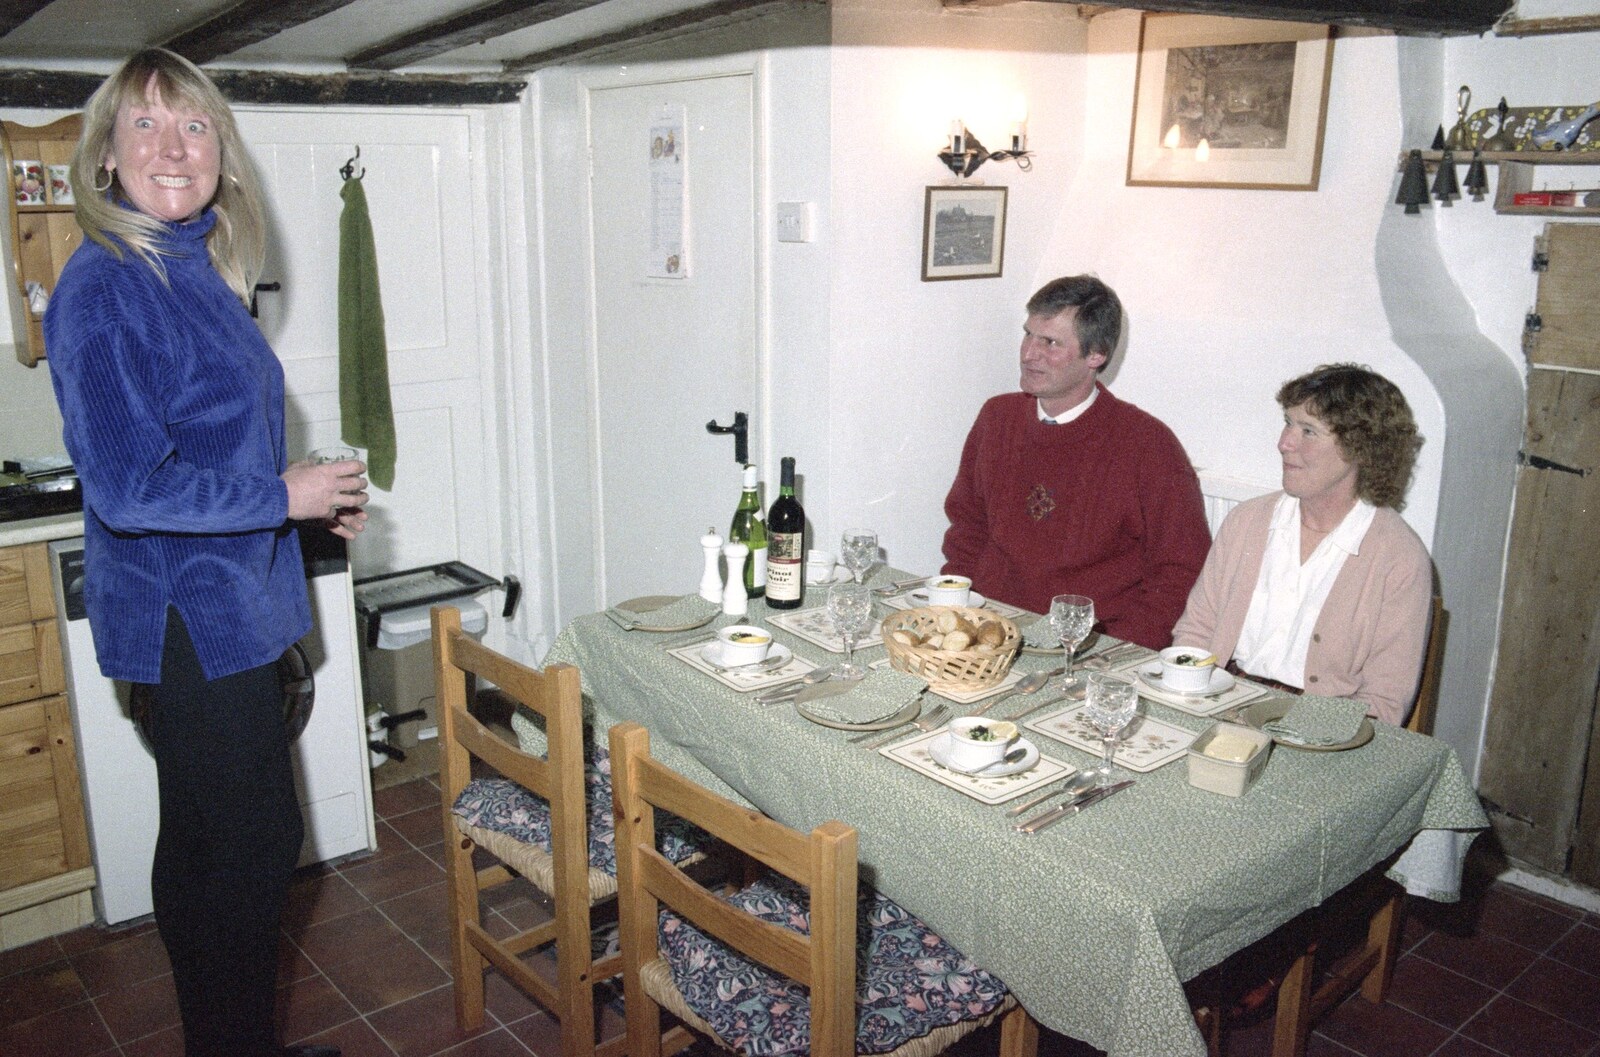 Sue in her kitchen from Lunch and Dinner at Mad Sue's, Stuston, Suffolk - 30th March 1995